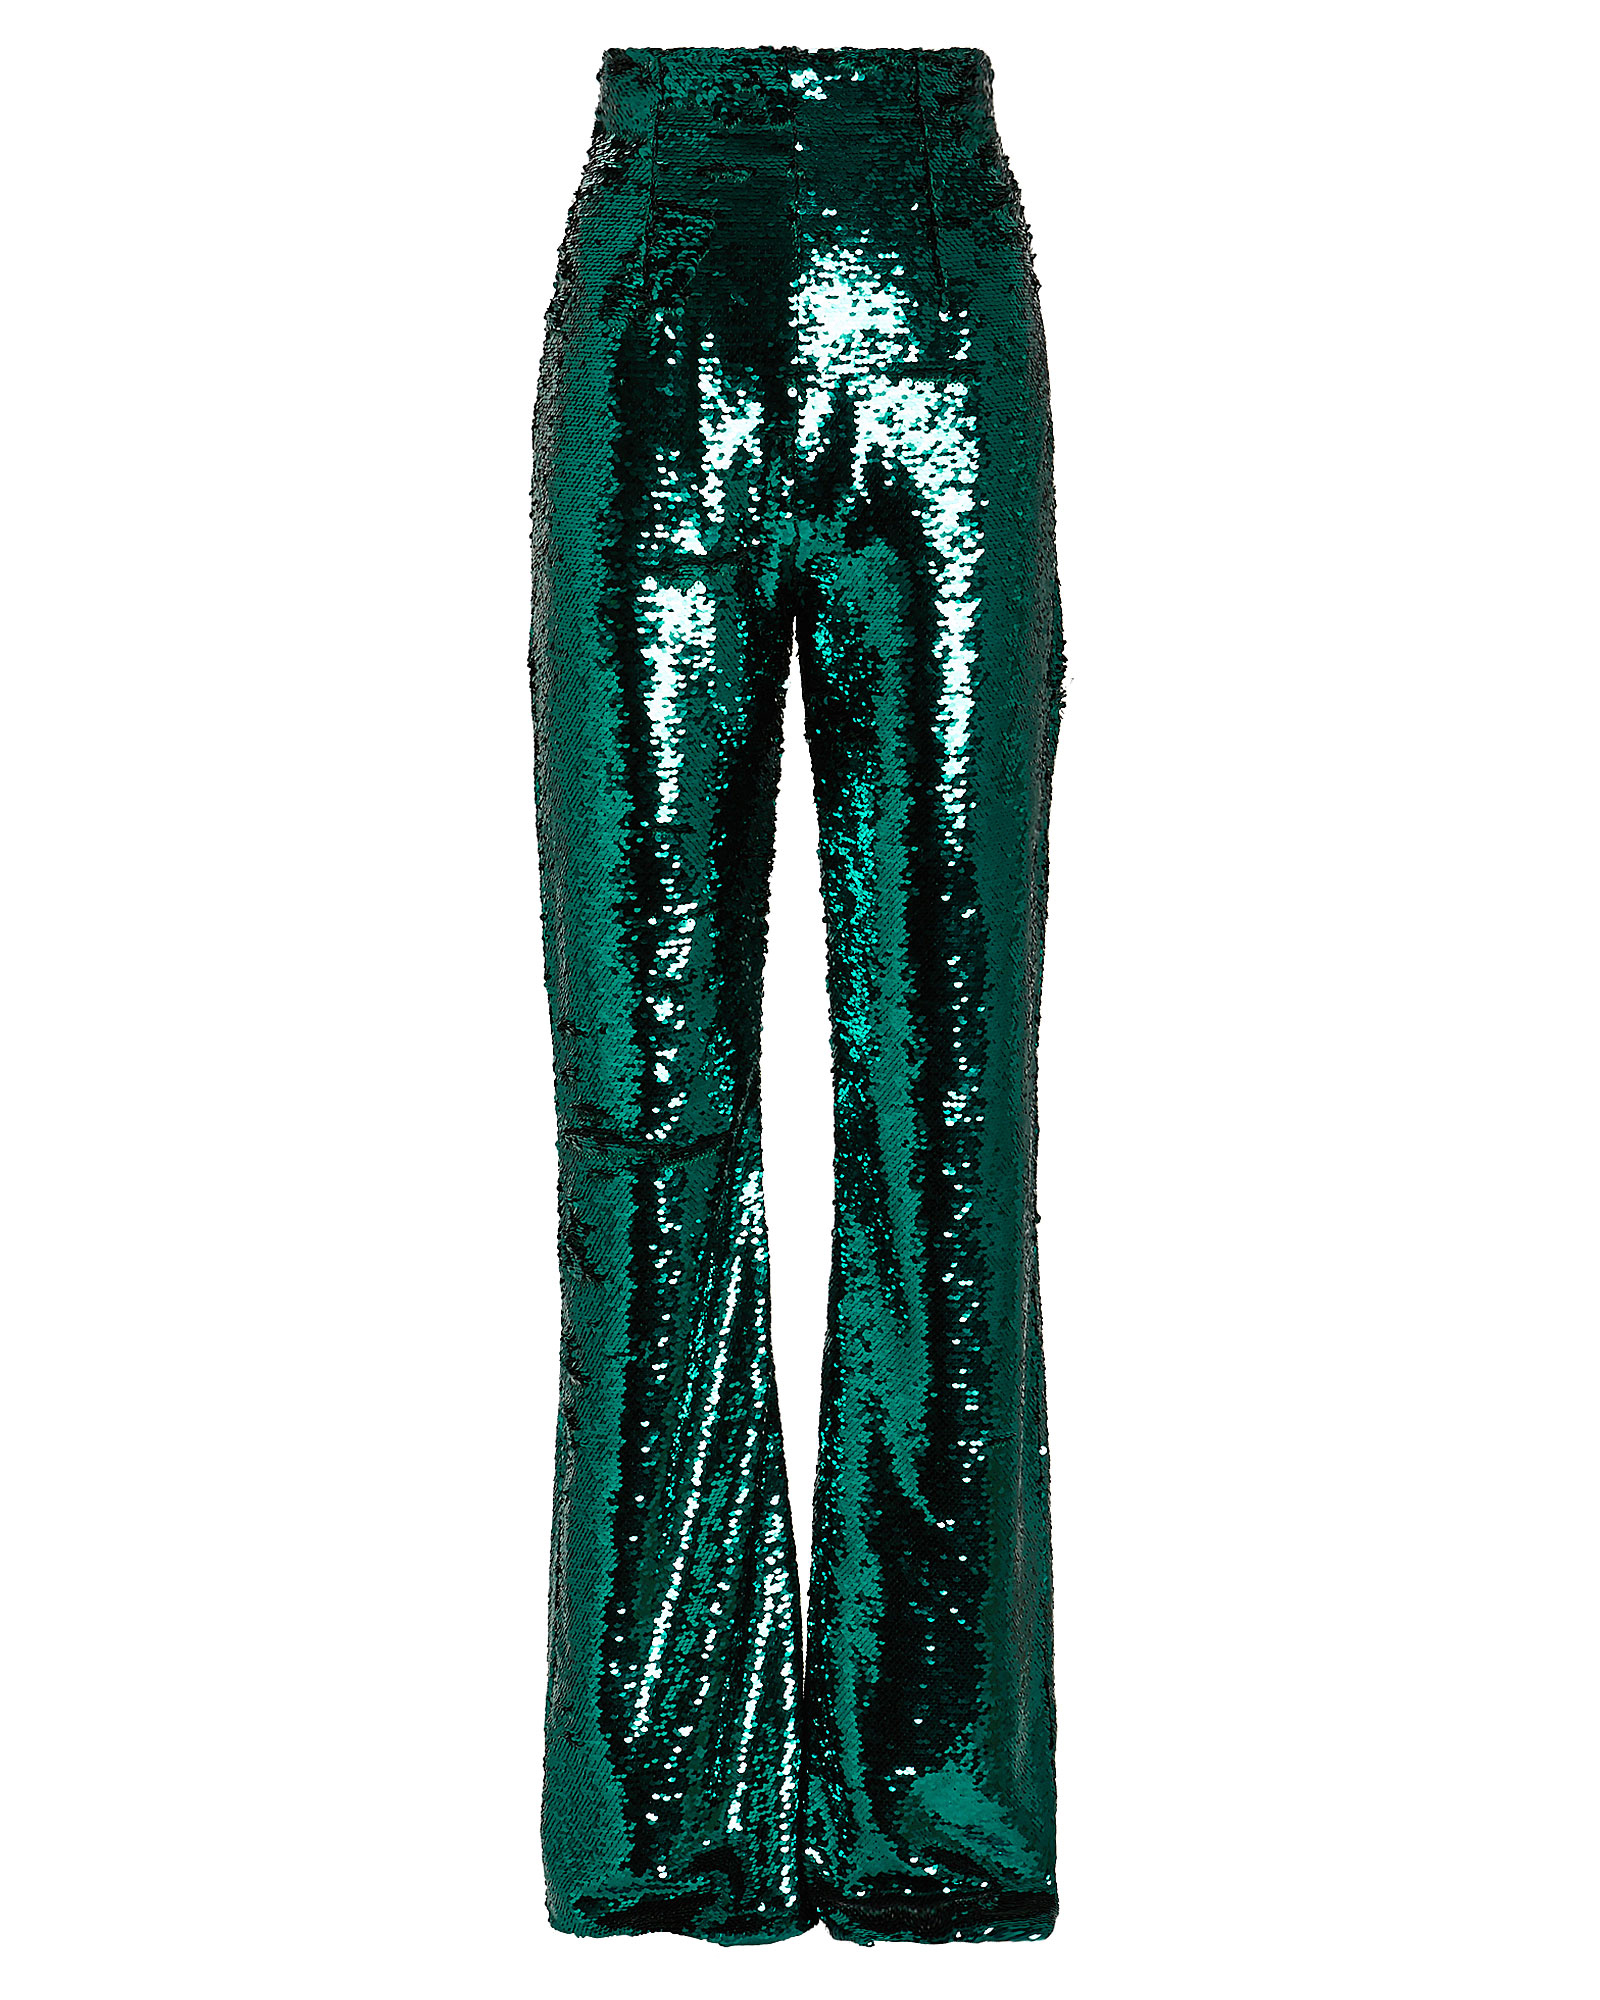 16ARLINGTON Newman Flared Sequin-Embellished Trousers in green | INTERMIX®